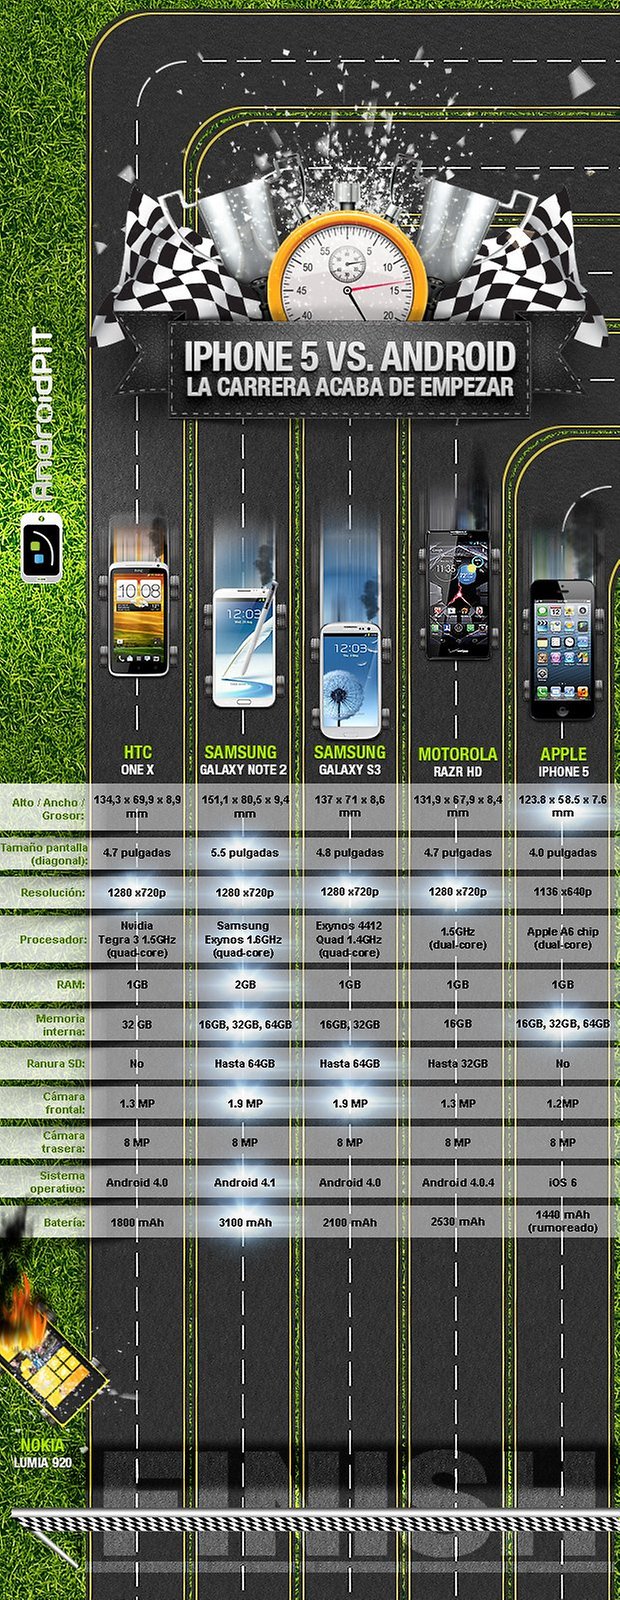 iphone 5 vs. Android